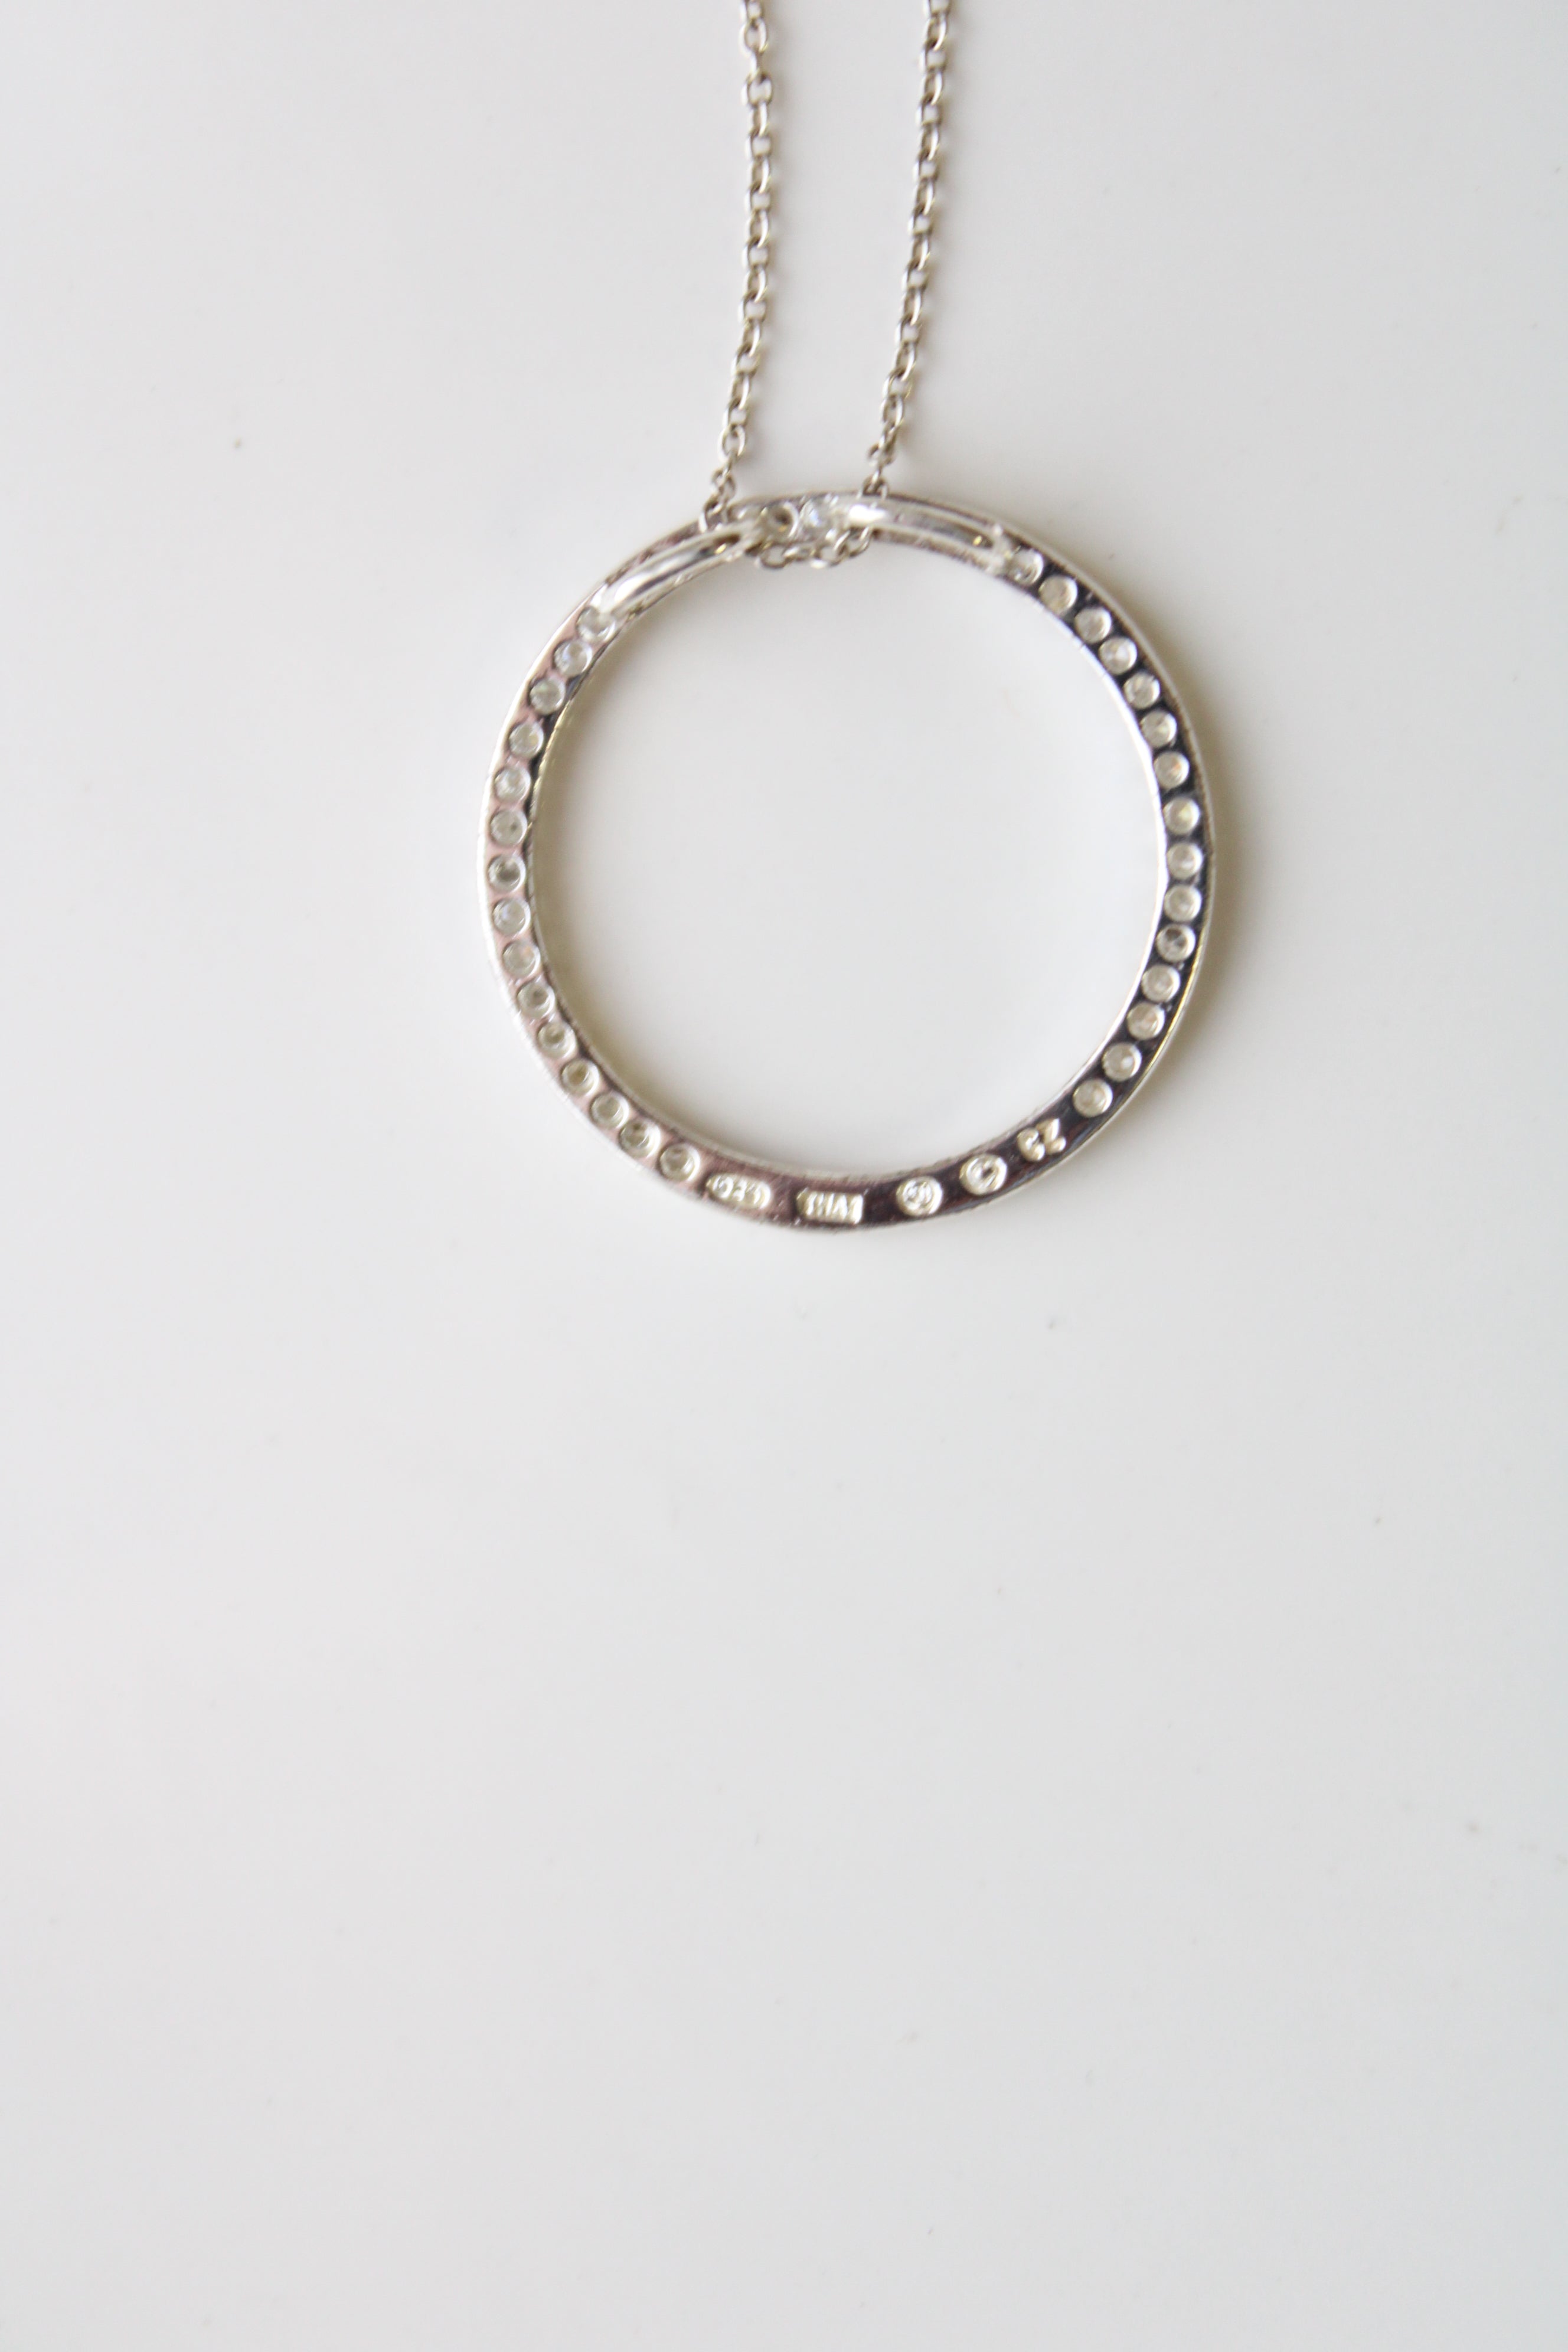 Clear Stone Circle Charm Sterling Silver Necklace